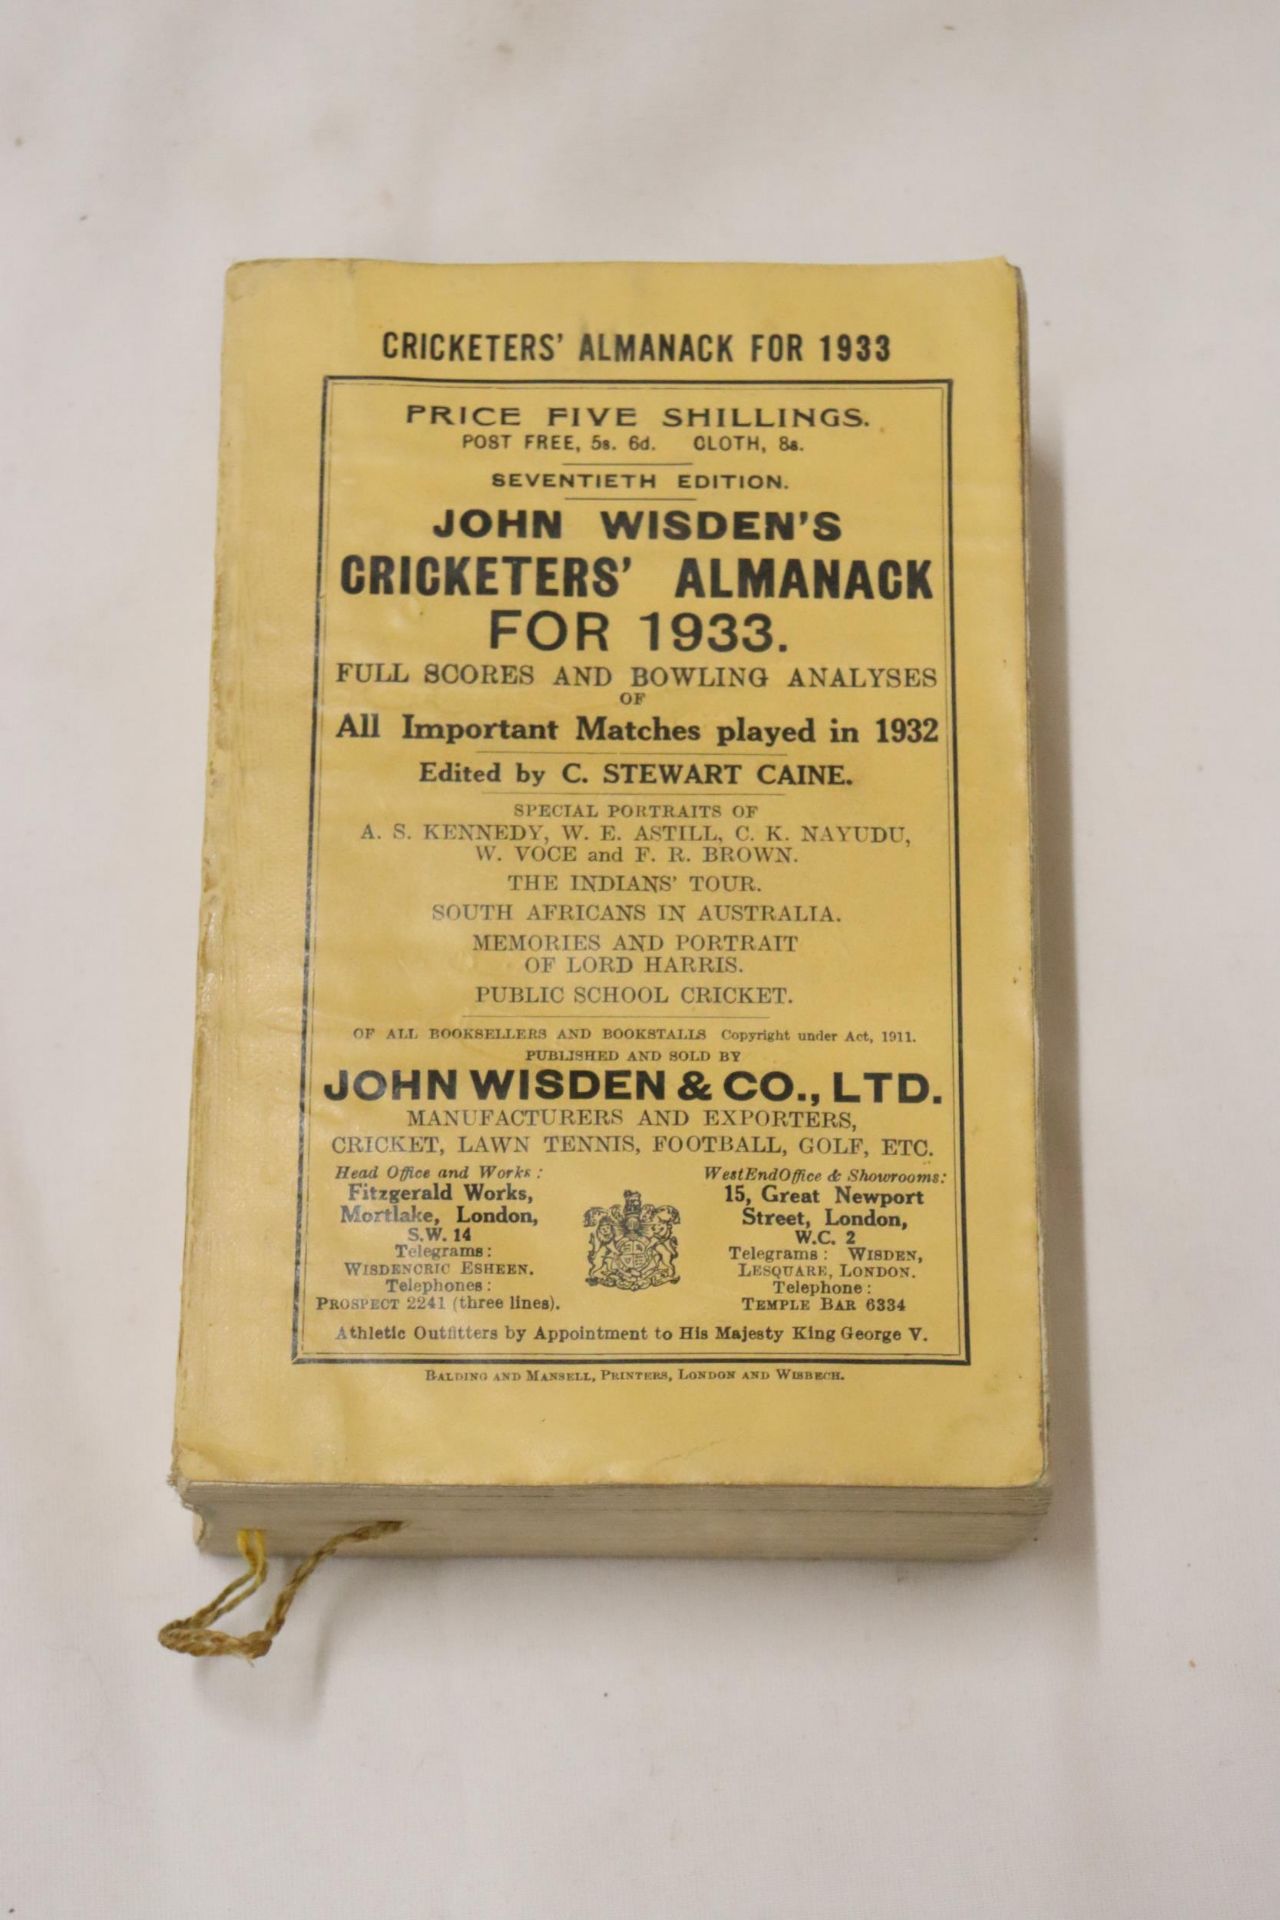 A 1933 COPY OF WISDEN'S CRICKETER'S ALMANACK. THIS COPY IS IN USED CONDITION, THE SPINE IS INTACT